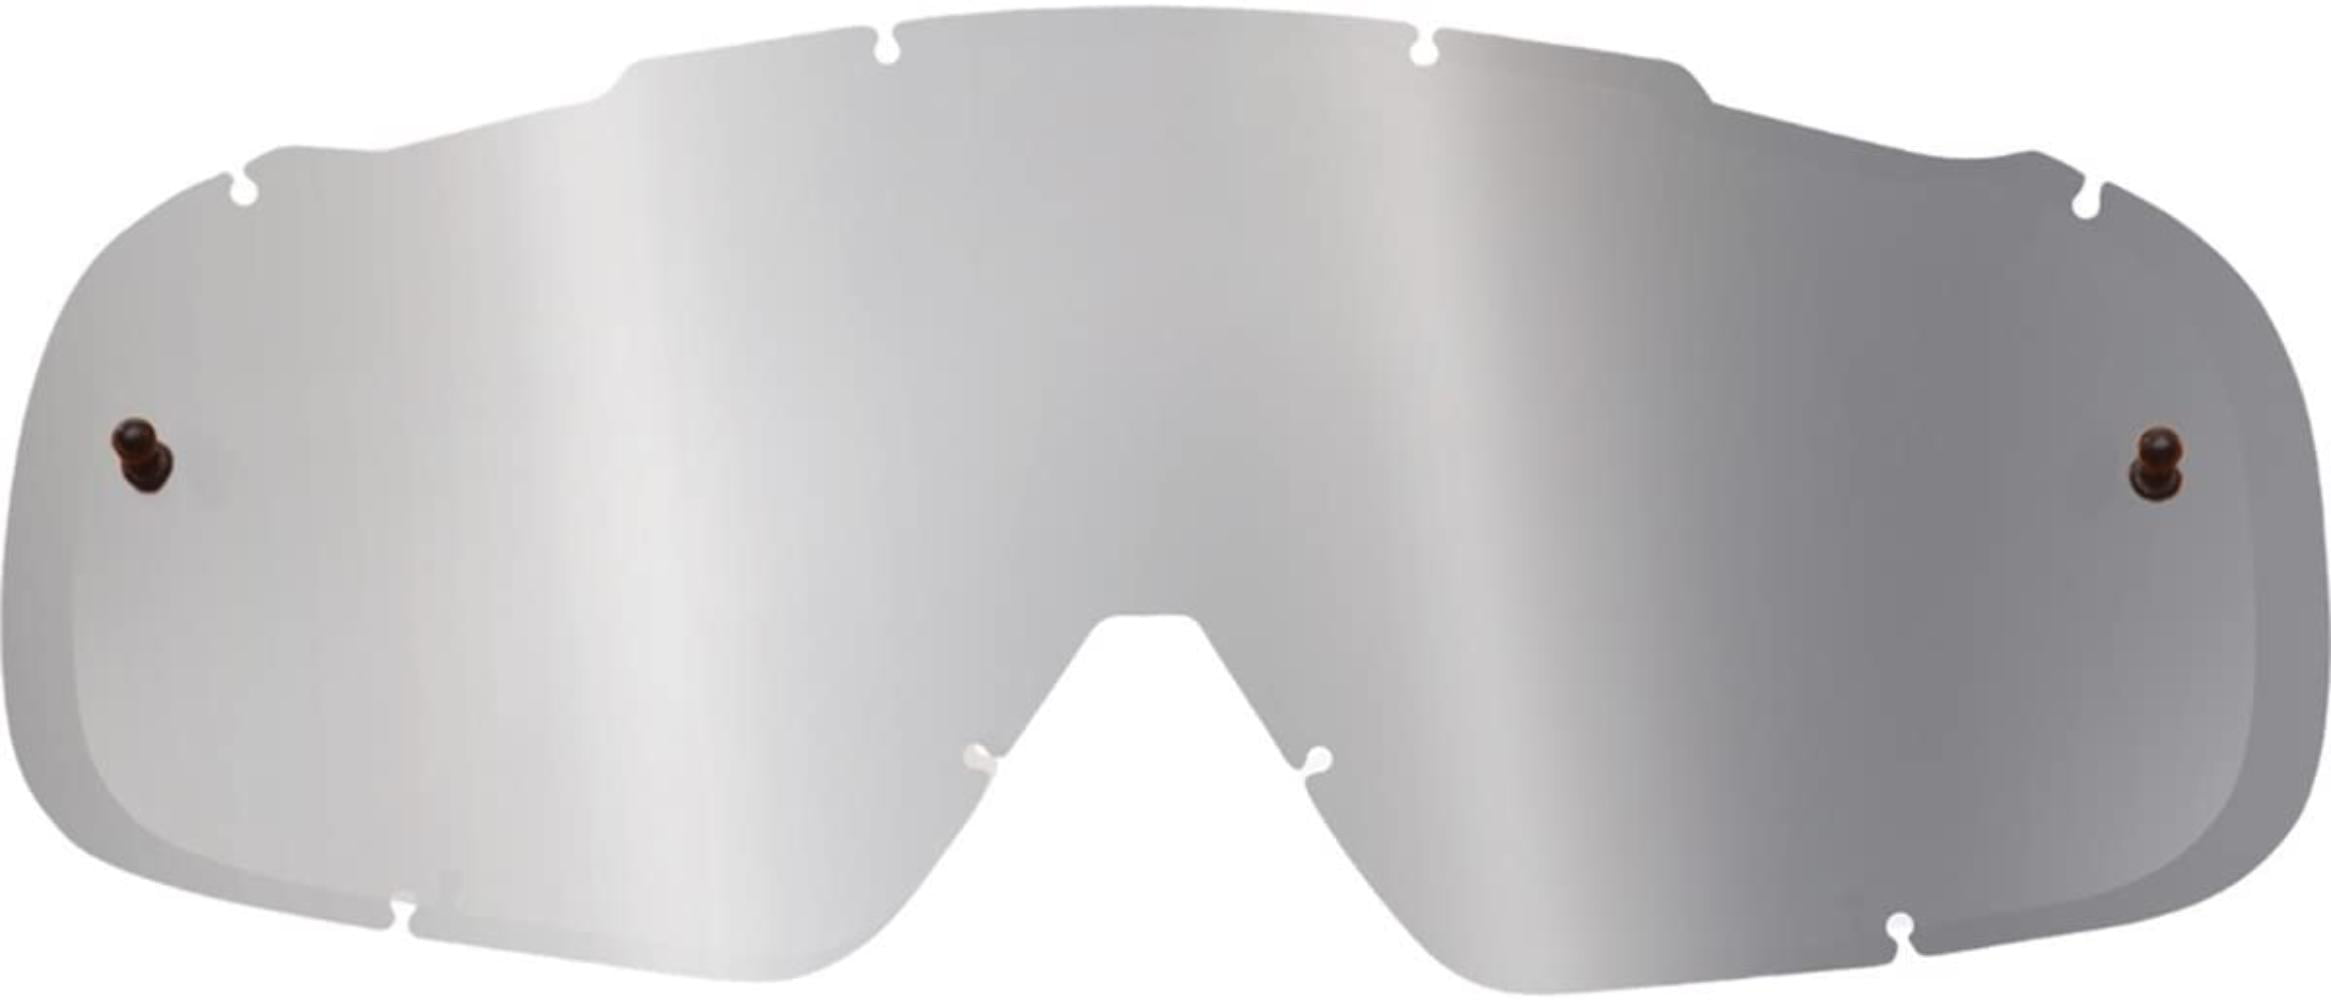 Fox Racing Replacement Standard Anti-Fog Lens for AIRSPC Air Space Goggles 